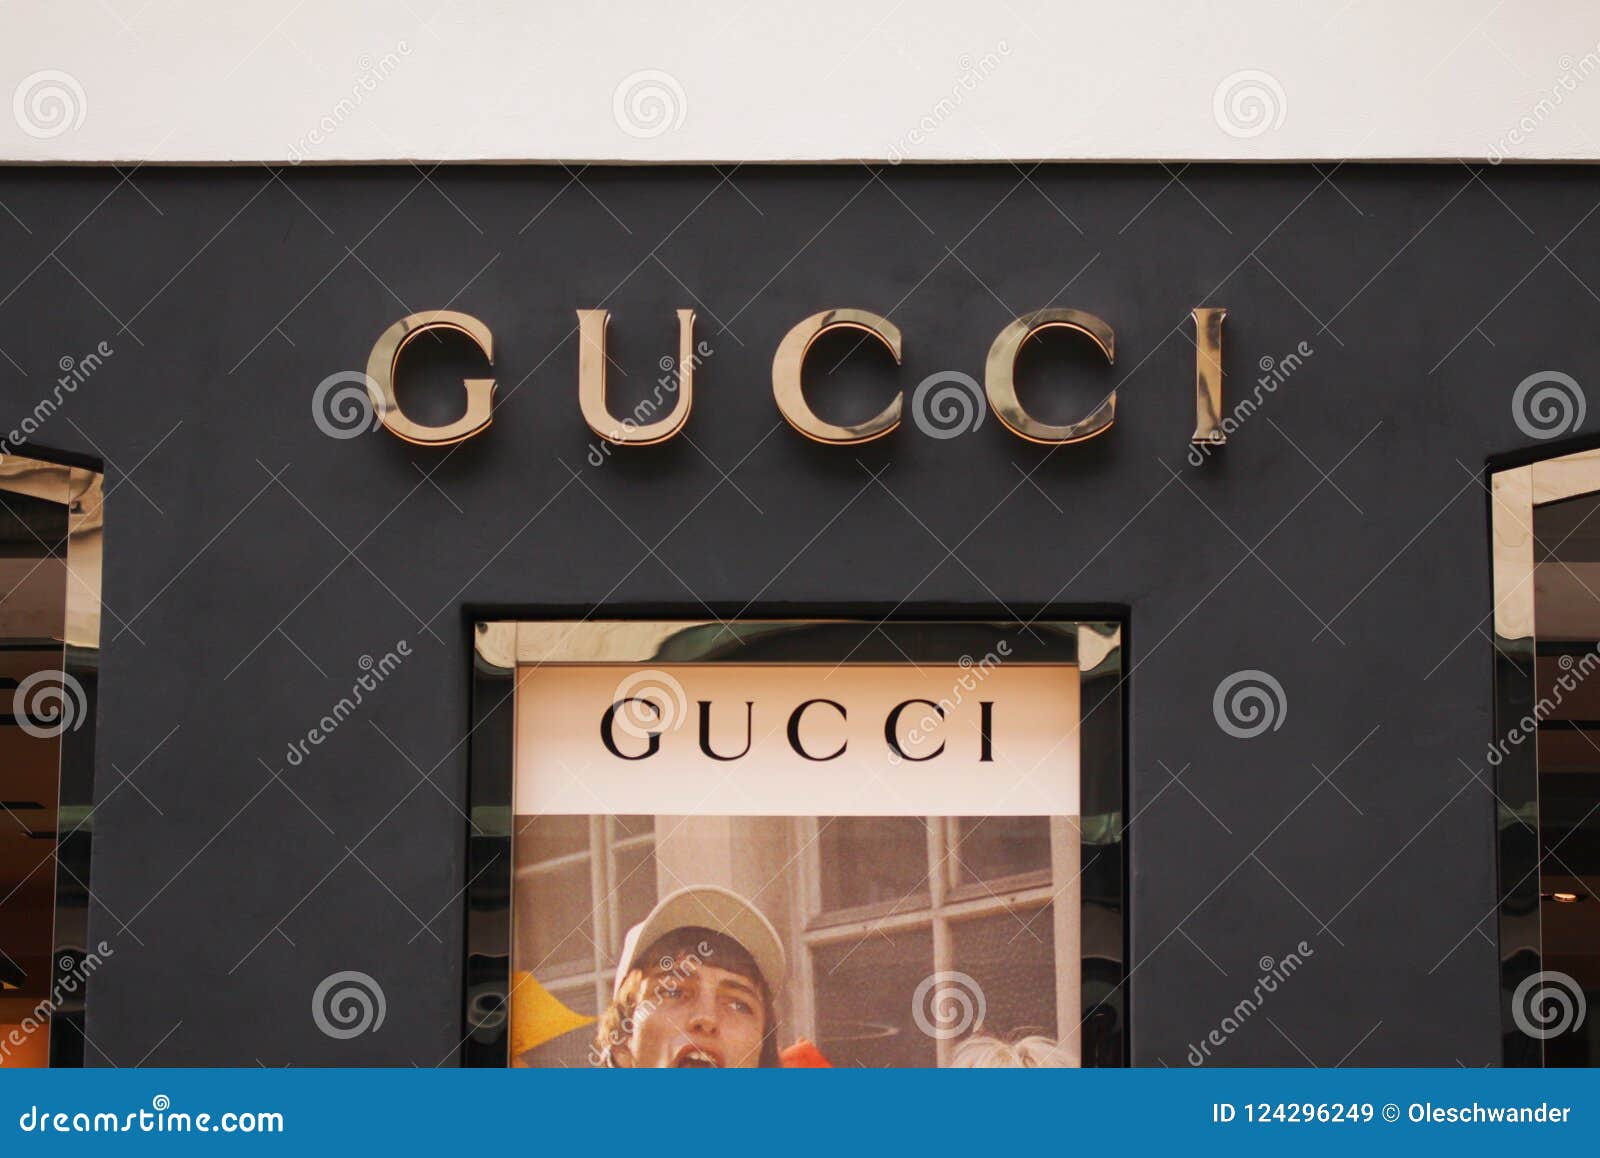 Alvorlig Pump Orkan The Sign of Gucci at Gucci on Store. Gucci is an Italian Fashion and Leather  Goods Brand. Editorial Stock Image - Image of front, black: 124296249